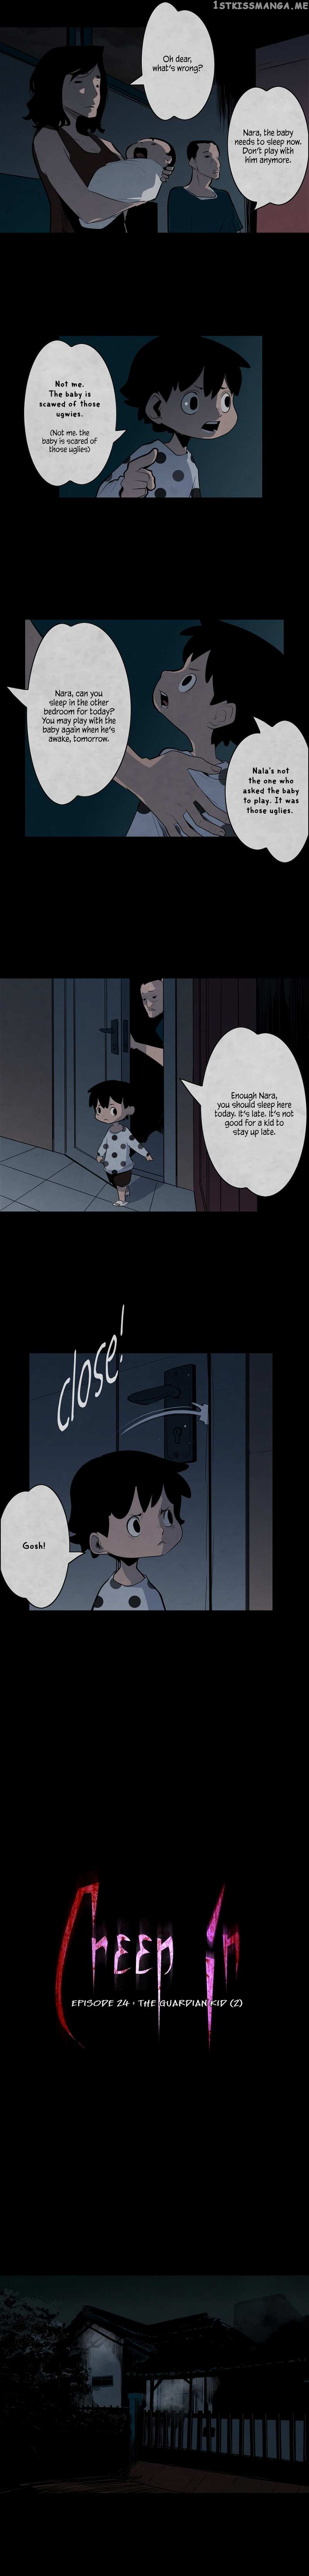 Creep In chapter 24 - page 3